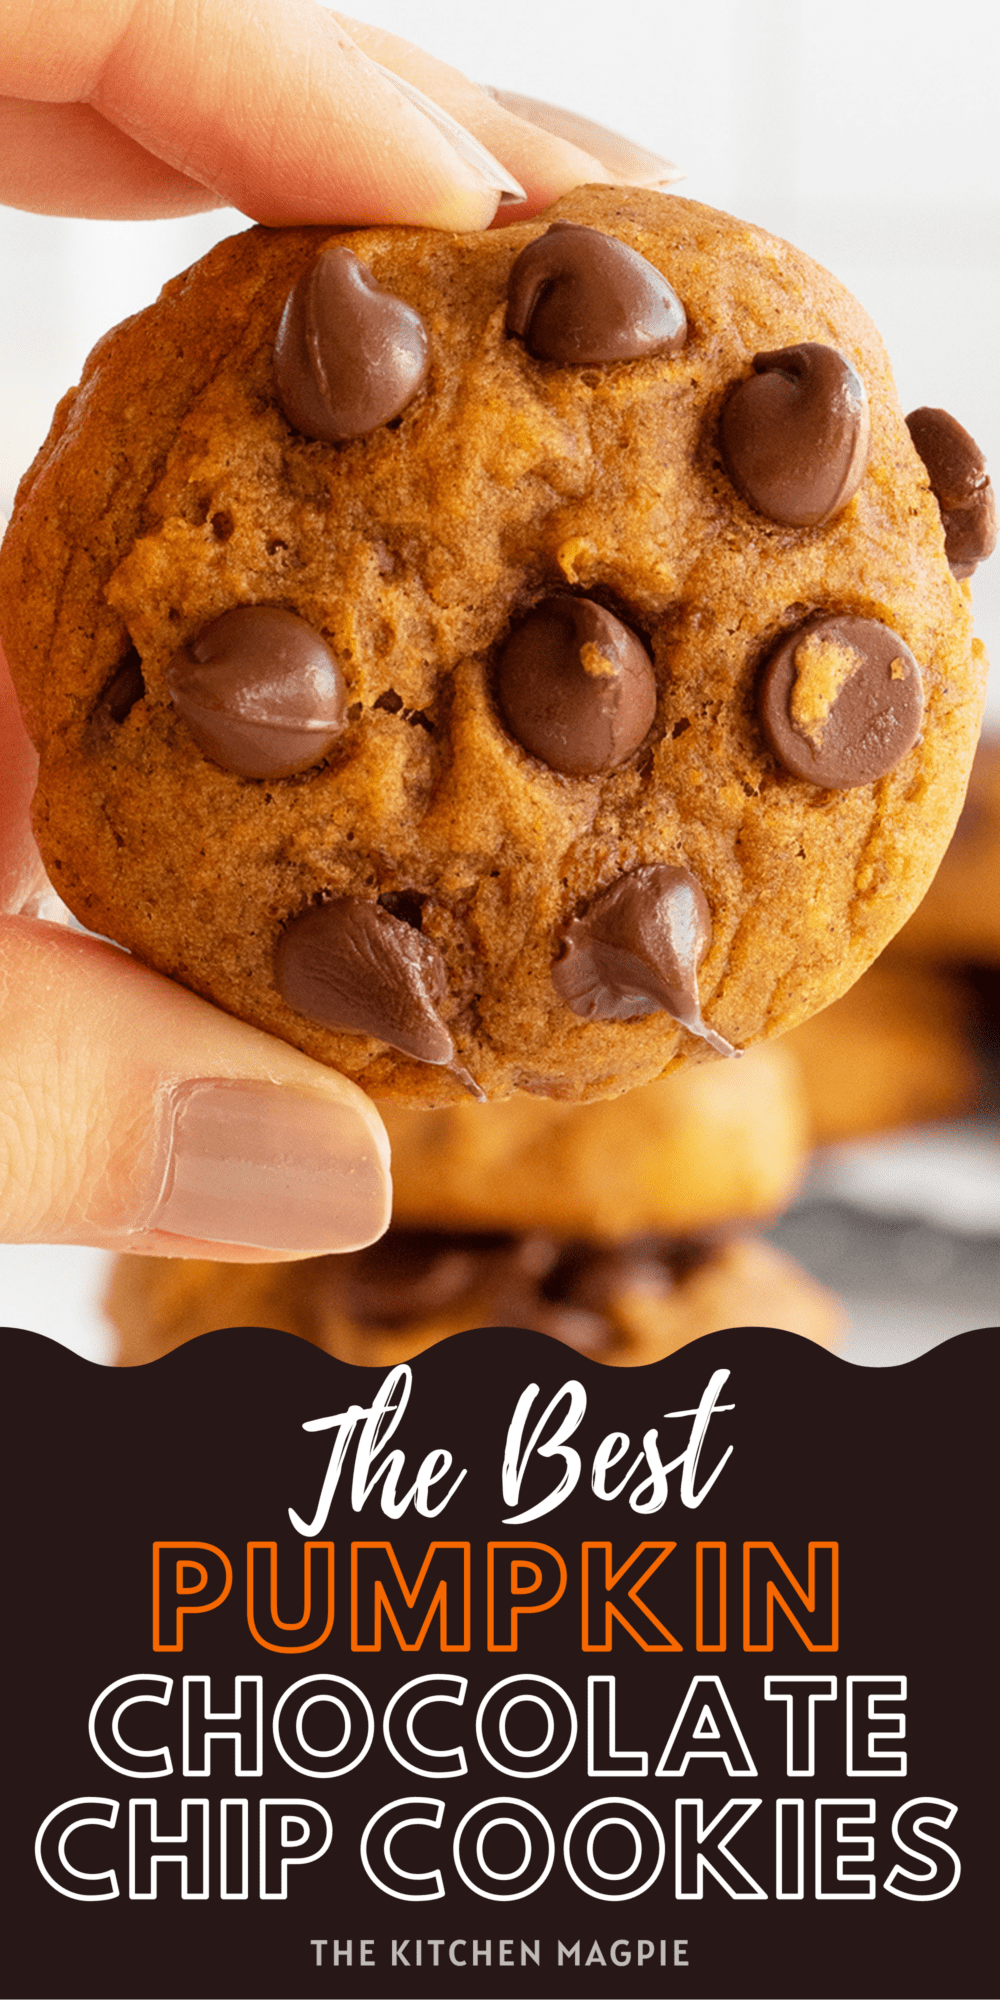 Why not combine pumpkin and chocolate chips into one immensely tasty cookie using this recipe for pumpkin chocolate chip cookies?